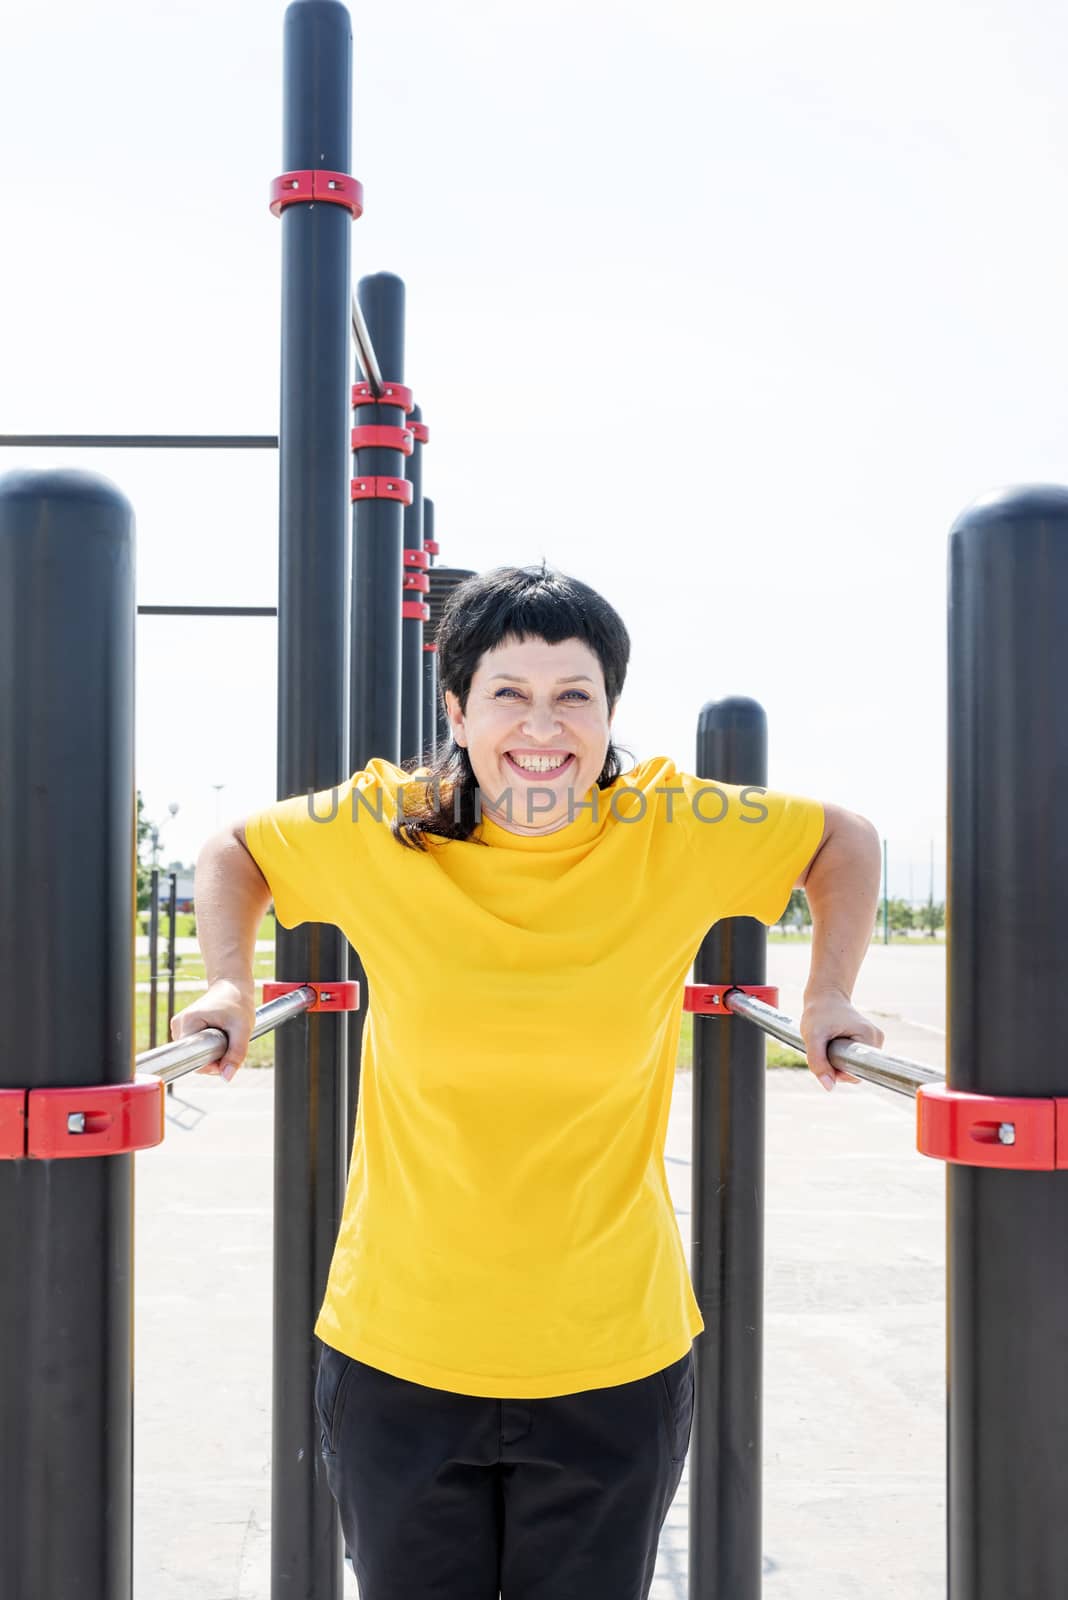 Smiling senior woman doing reverse push ups outdoors on the sports ground bars by Desperada